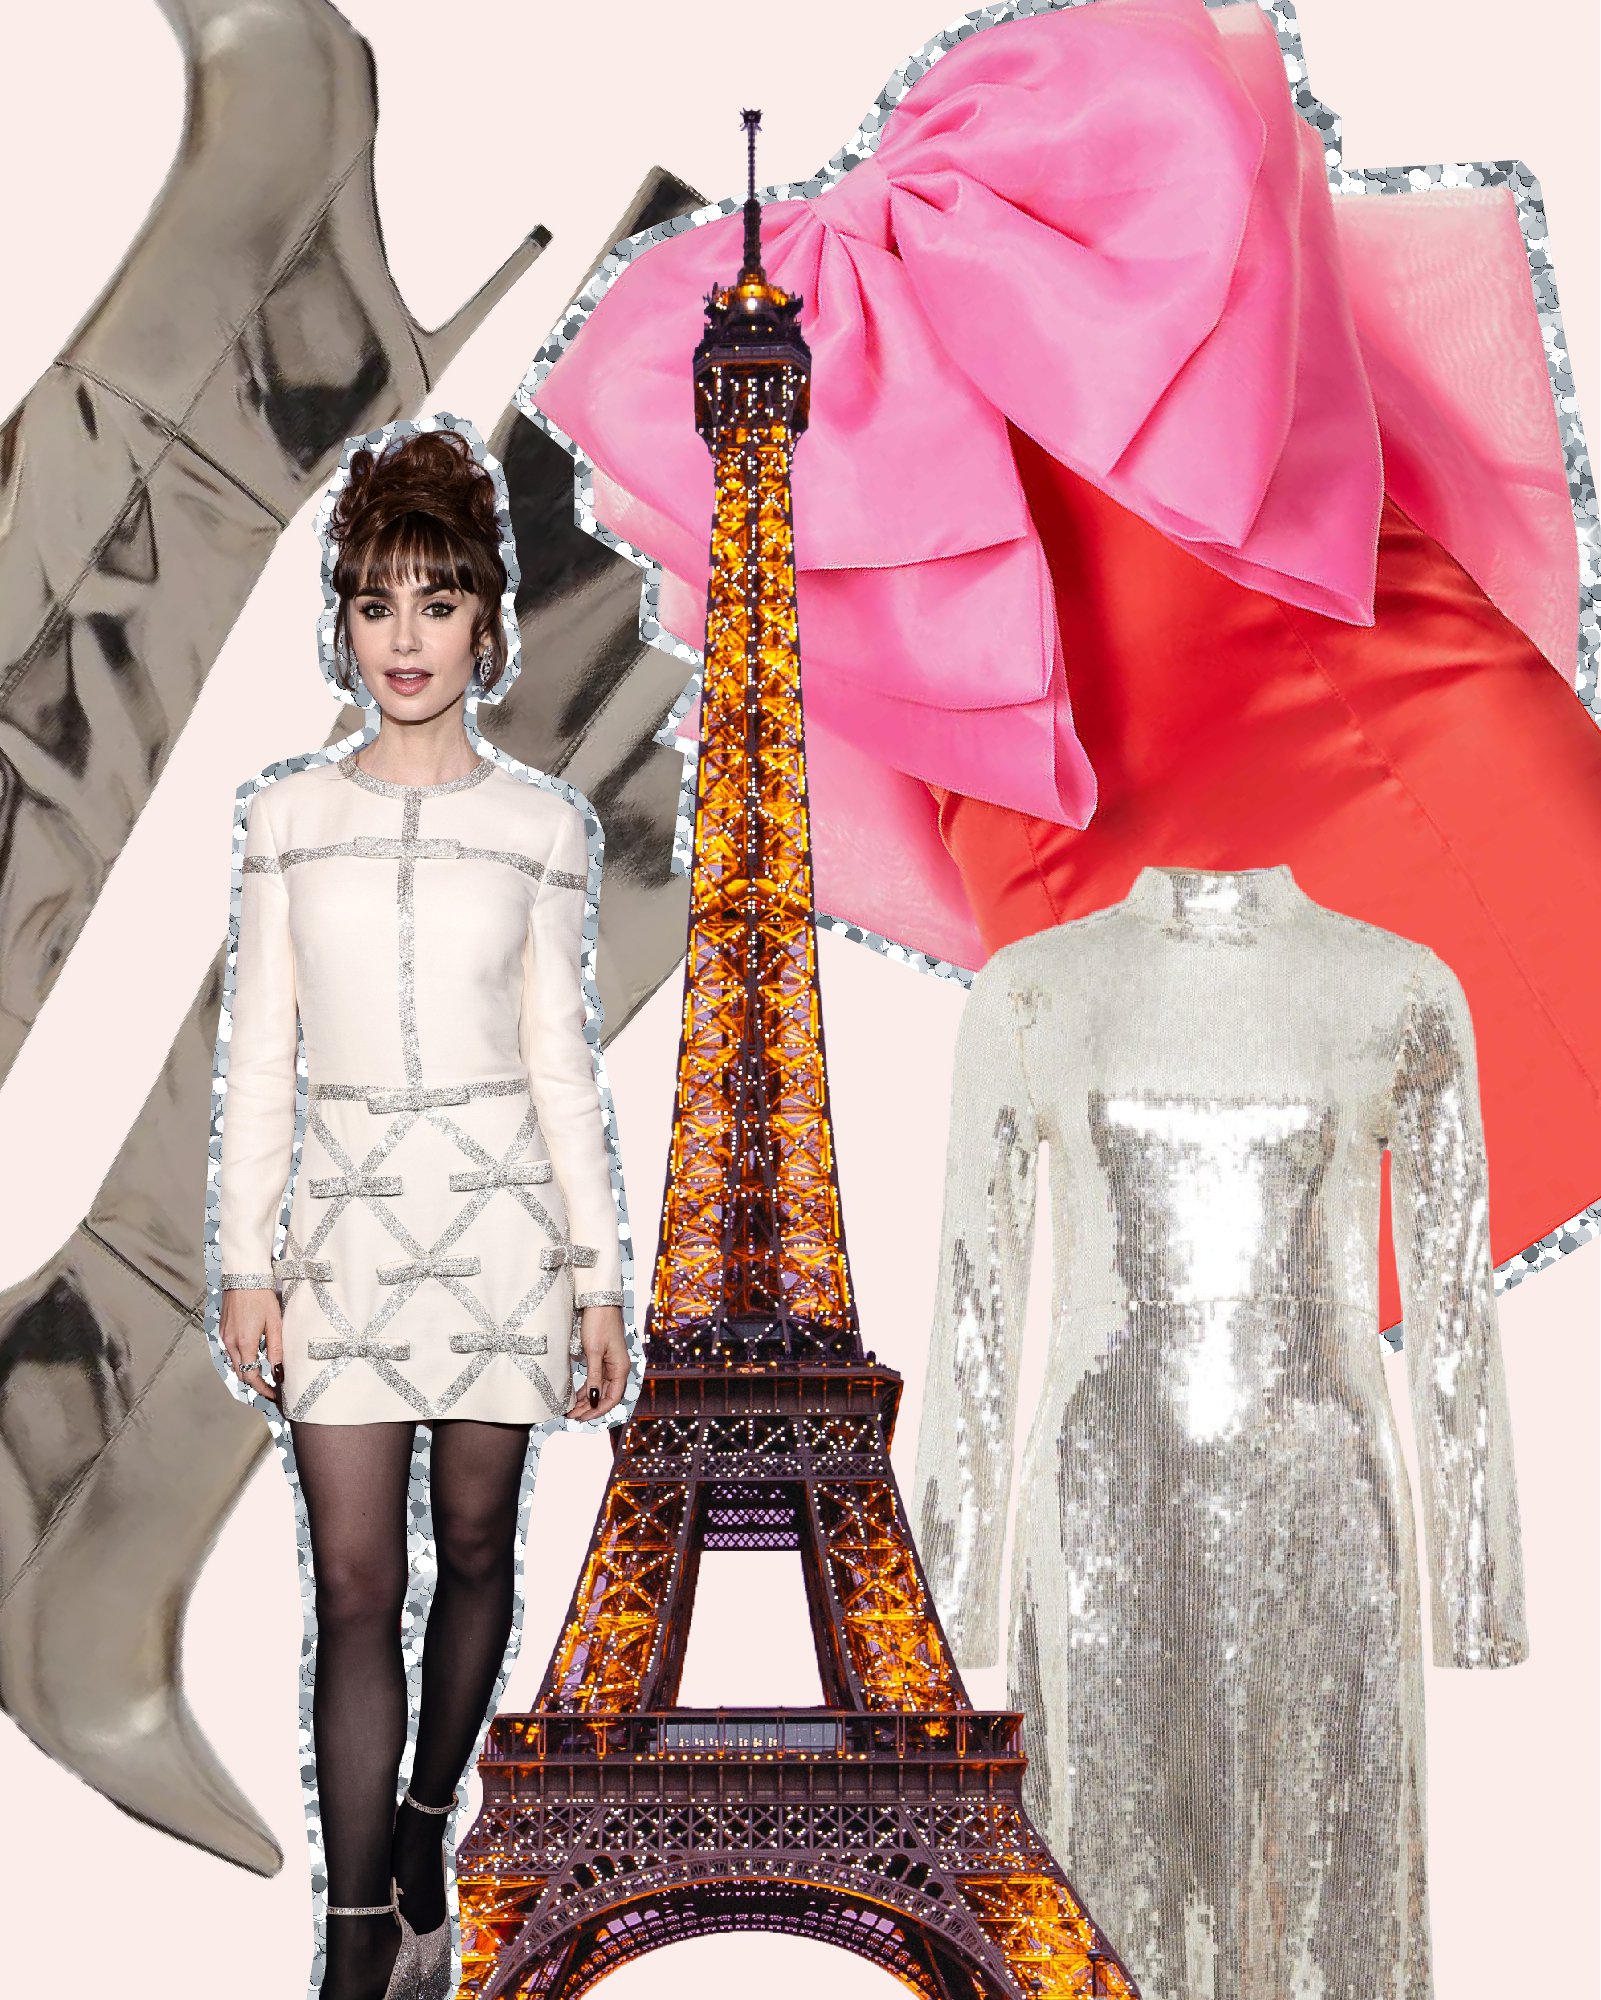 Why Emily In Paris Outfits Are Perfect New Year's Eve Style Inspiration